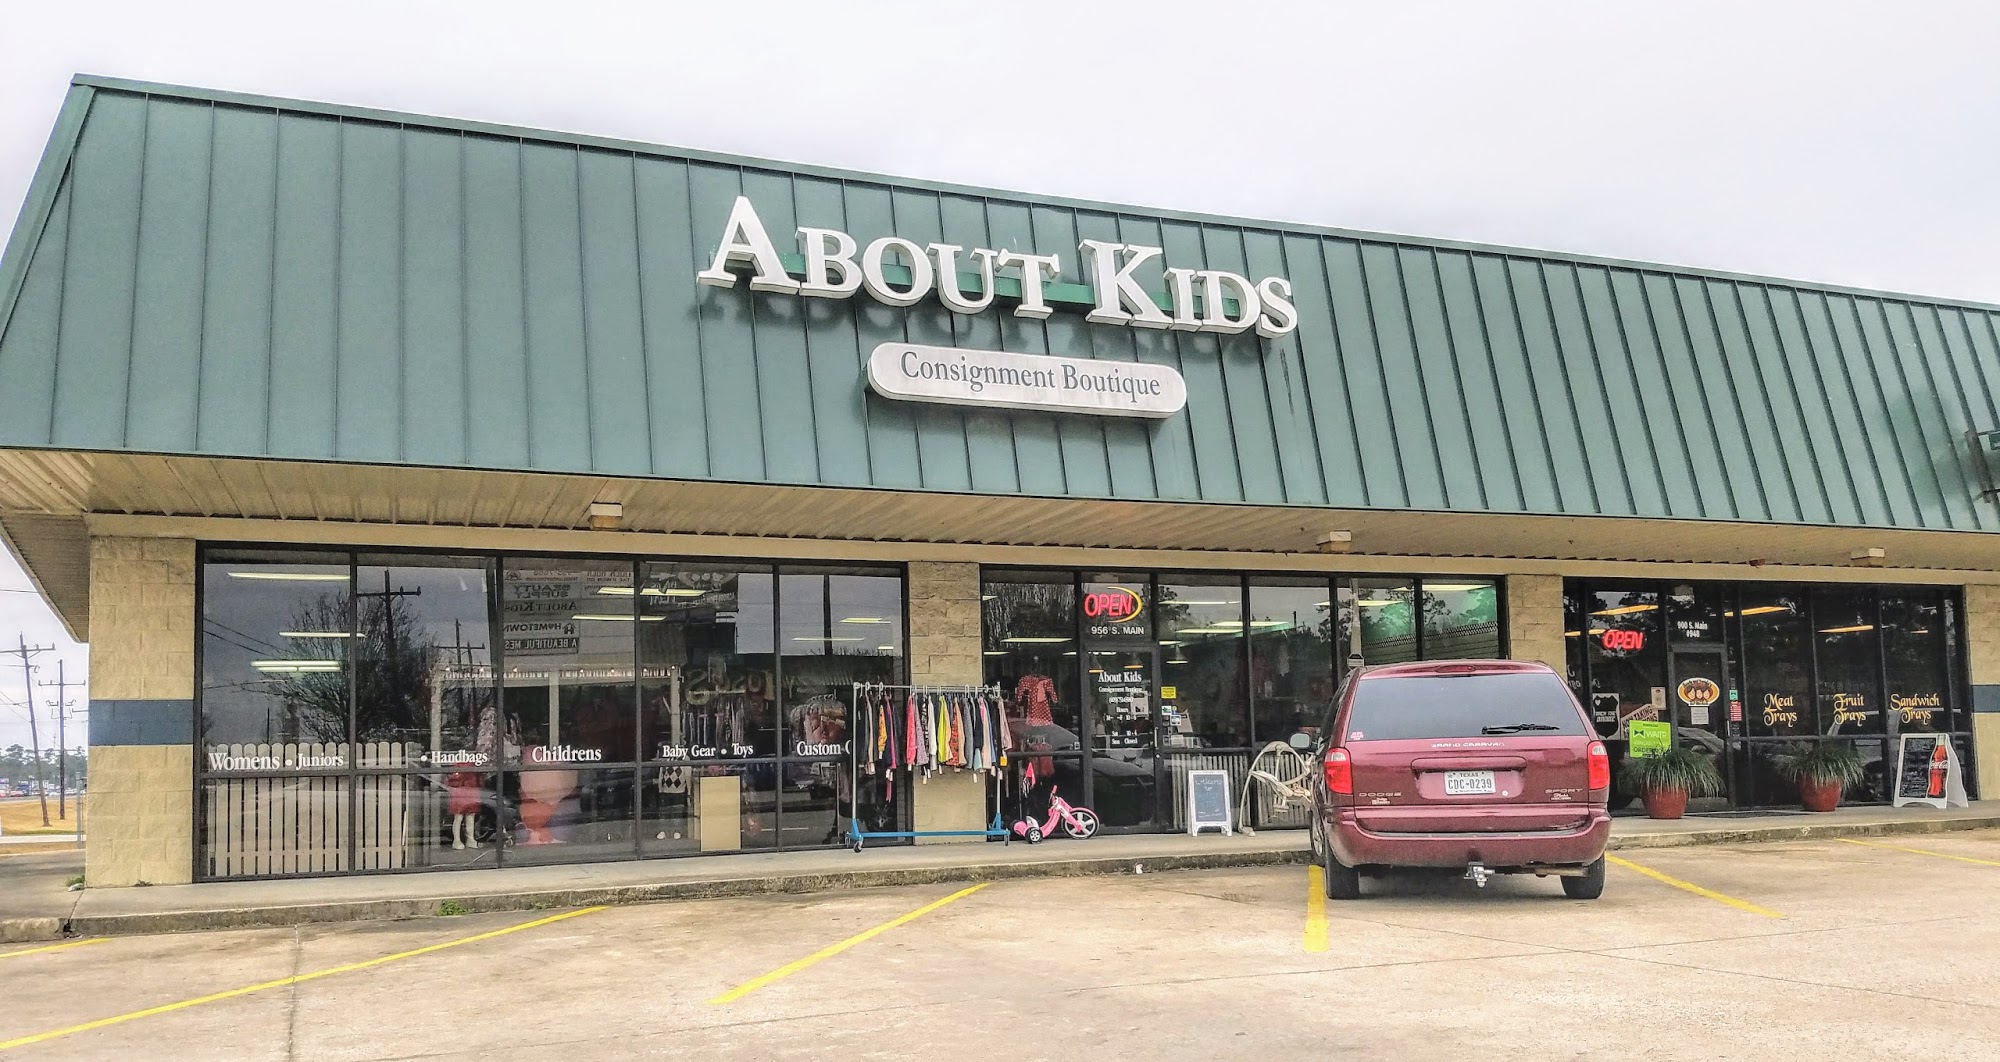 About Kids Consignment Boutique